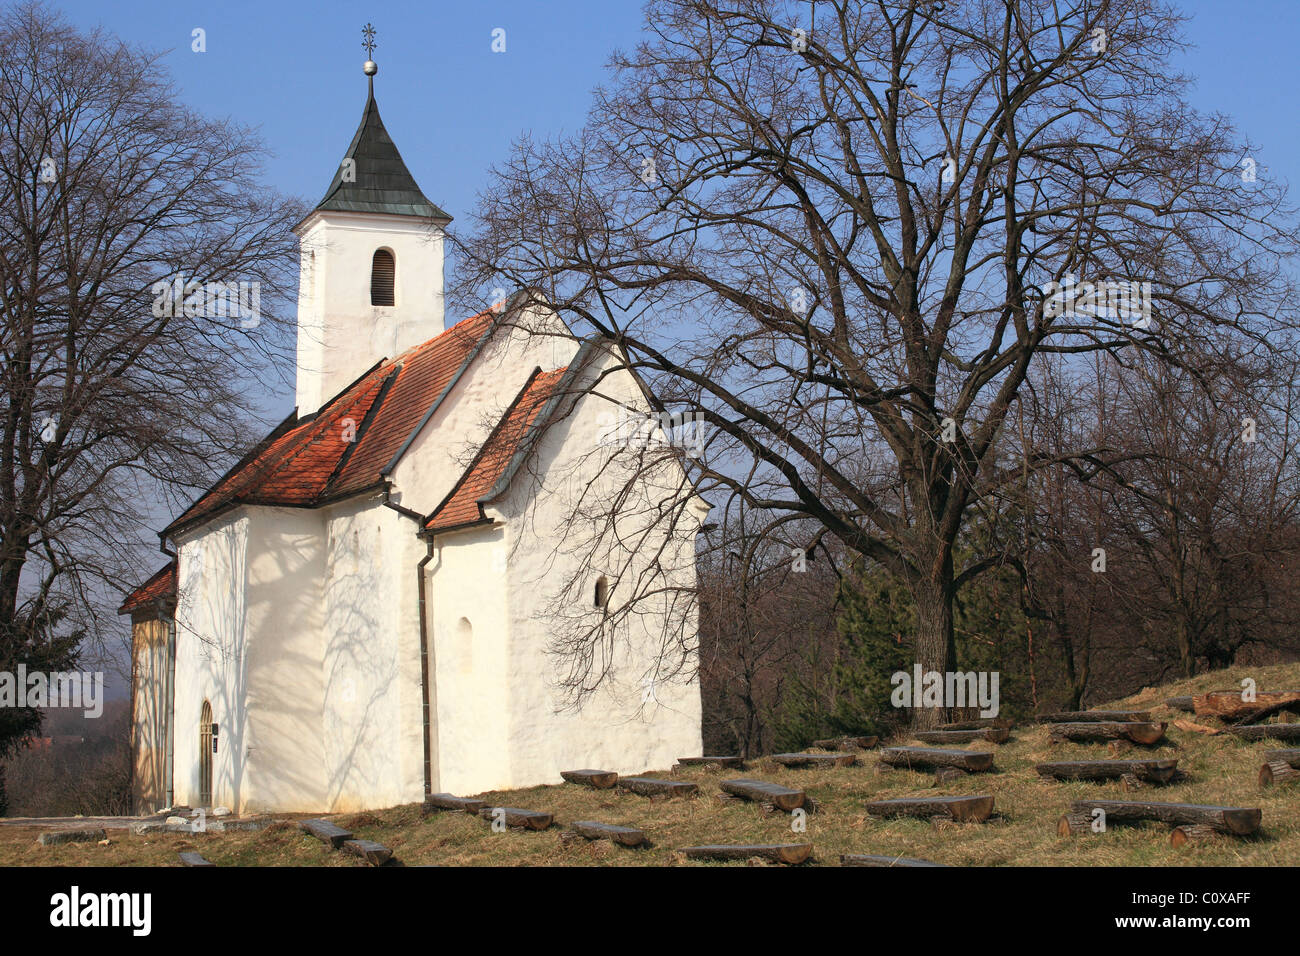 The old Catholic church, from Romanesque period, dedicated to St. George in Kostolany pod Tribecom, Slovakia. Stock Photo